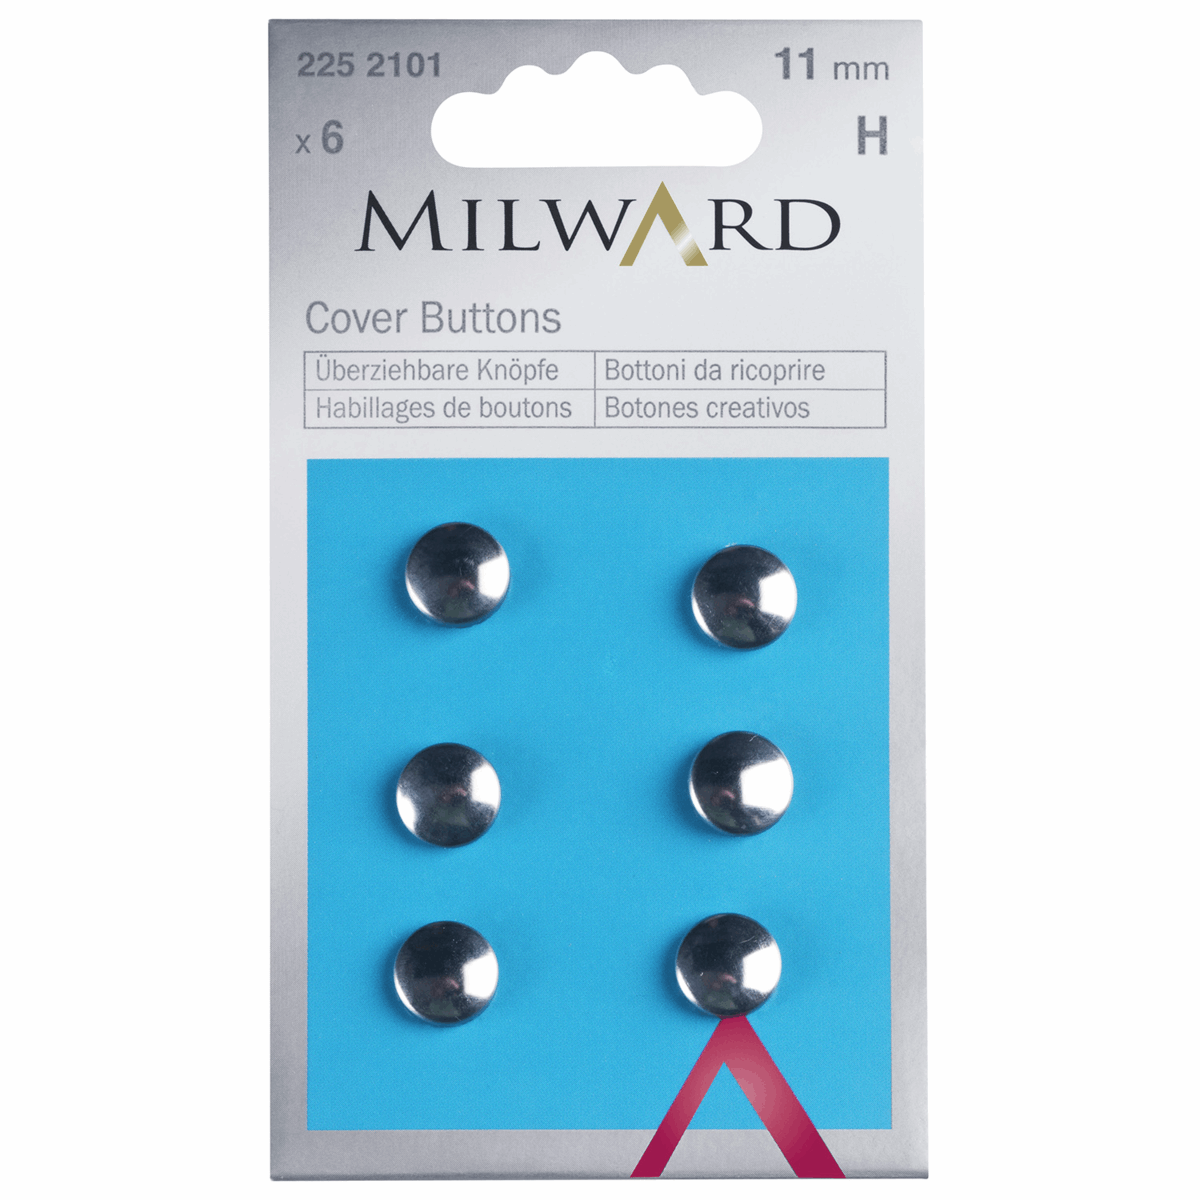 Milward - Self Covering Buttons - 11mm x 6